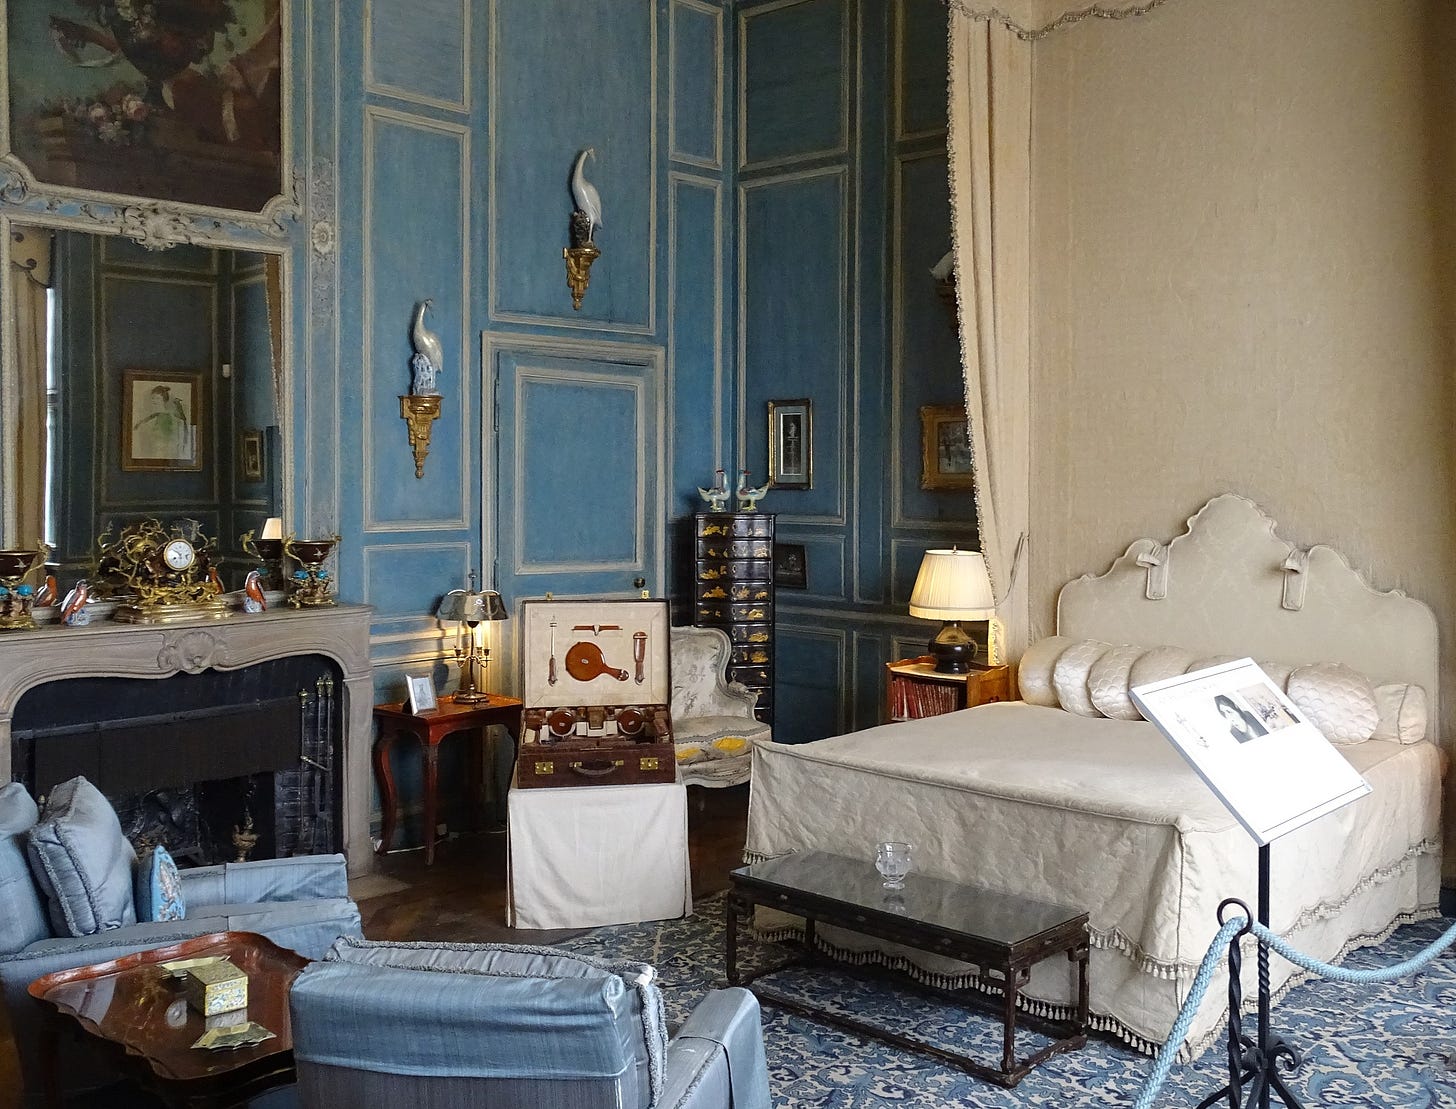 Lady Baillie’s bedroom, decorated in the French Régence style of the 18th century. The panelling was limed and glazed, the colour rubbed in dry, and then beeswaxed. [Image by Ad Meskens CCA-SA.4.0 via Wikimedia